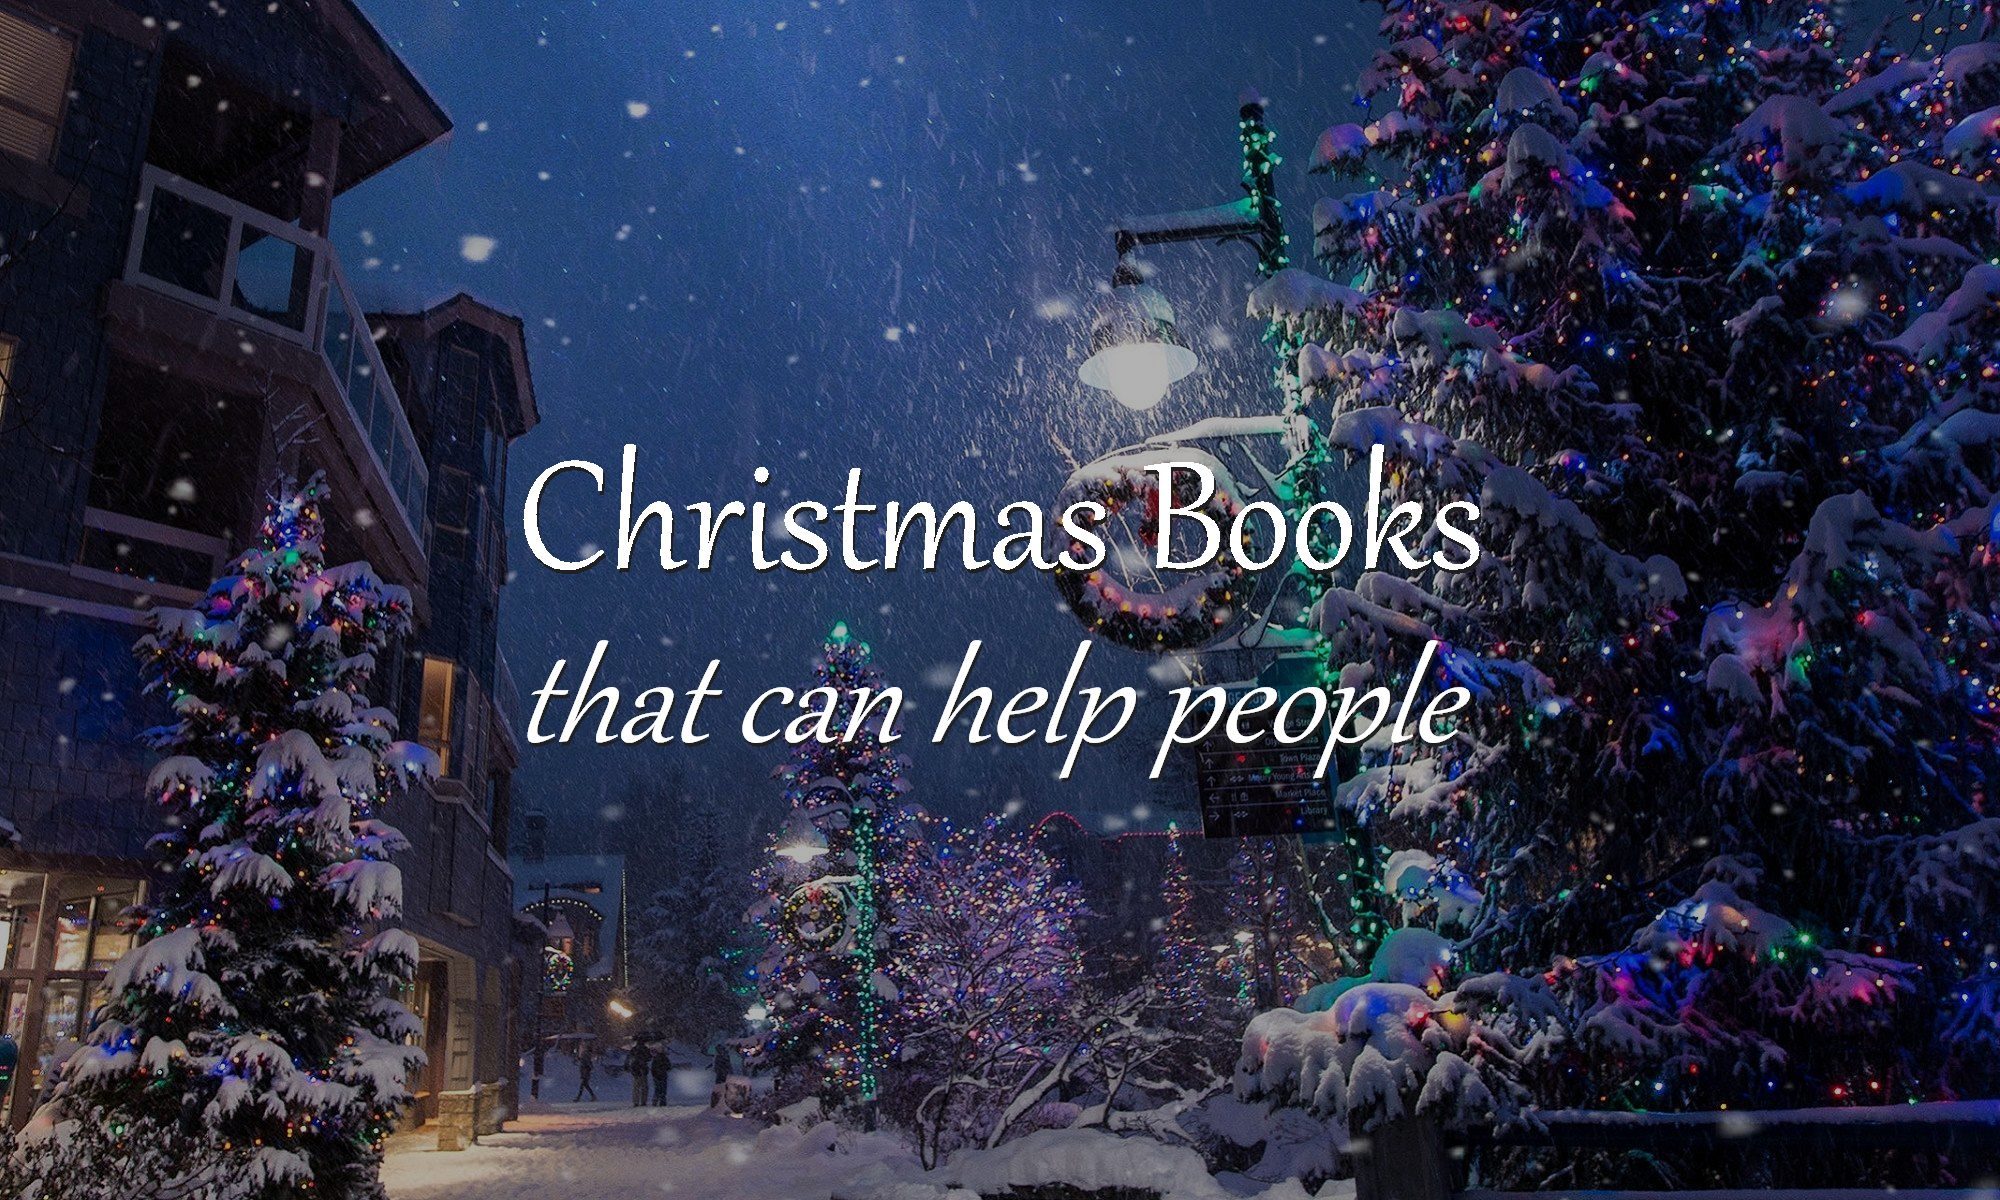 List of Christmas Books that Can Help People: Metaphysics, Self-Improvement Perfect Gift for creating happiness and success in life.